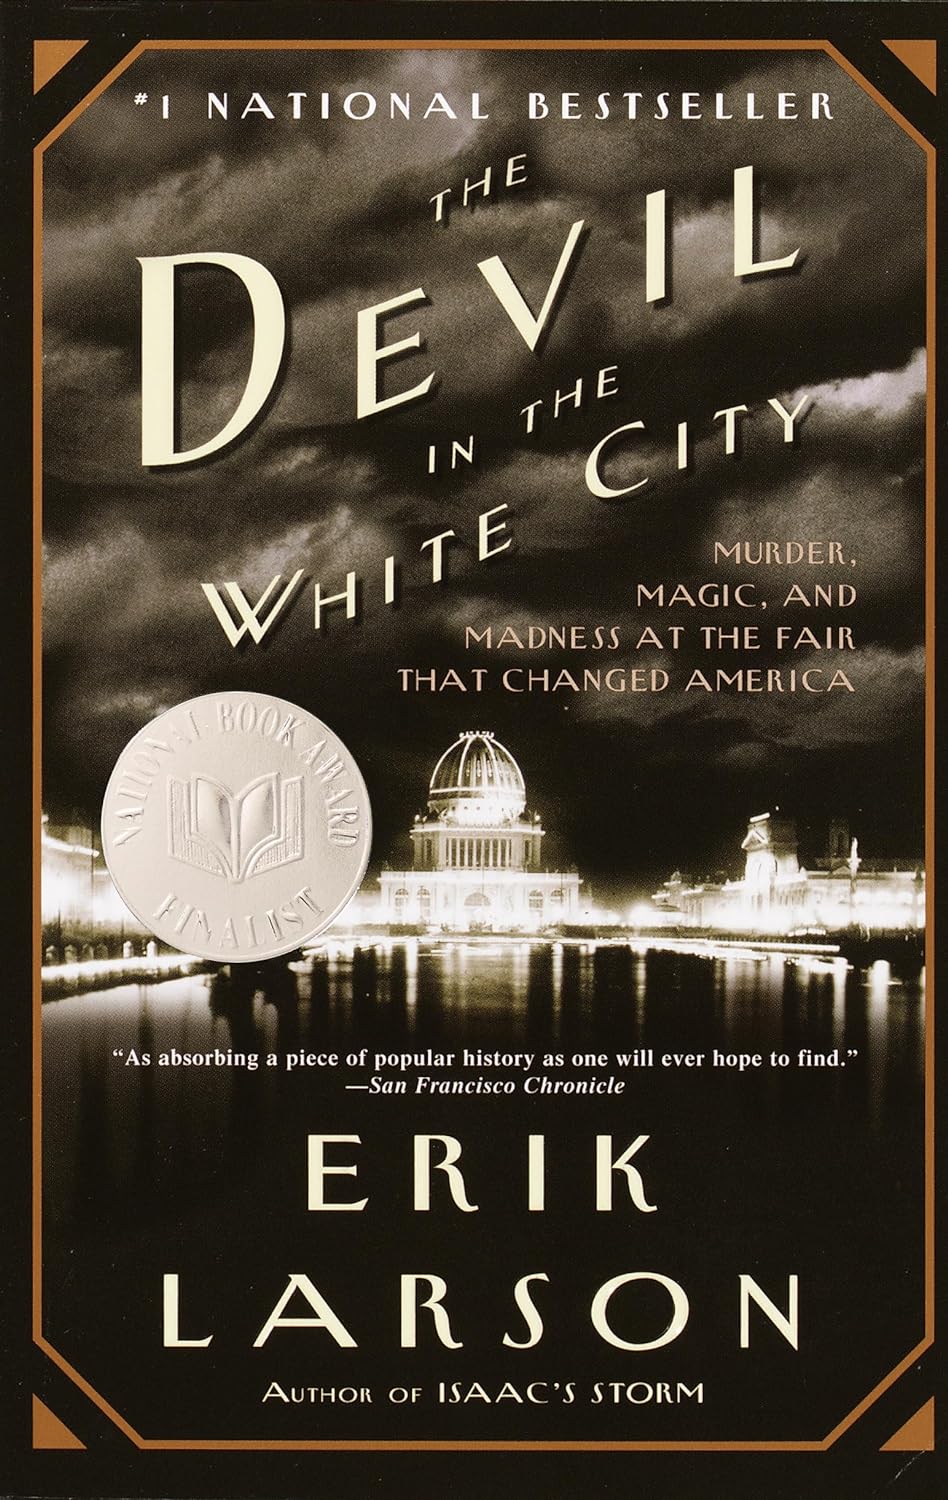 The Devil in the White City Murder, Magic, and Madness at the Fair That Changed America by Erik Larson